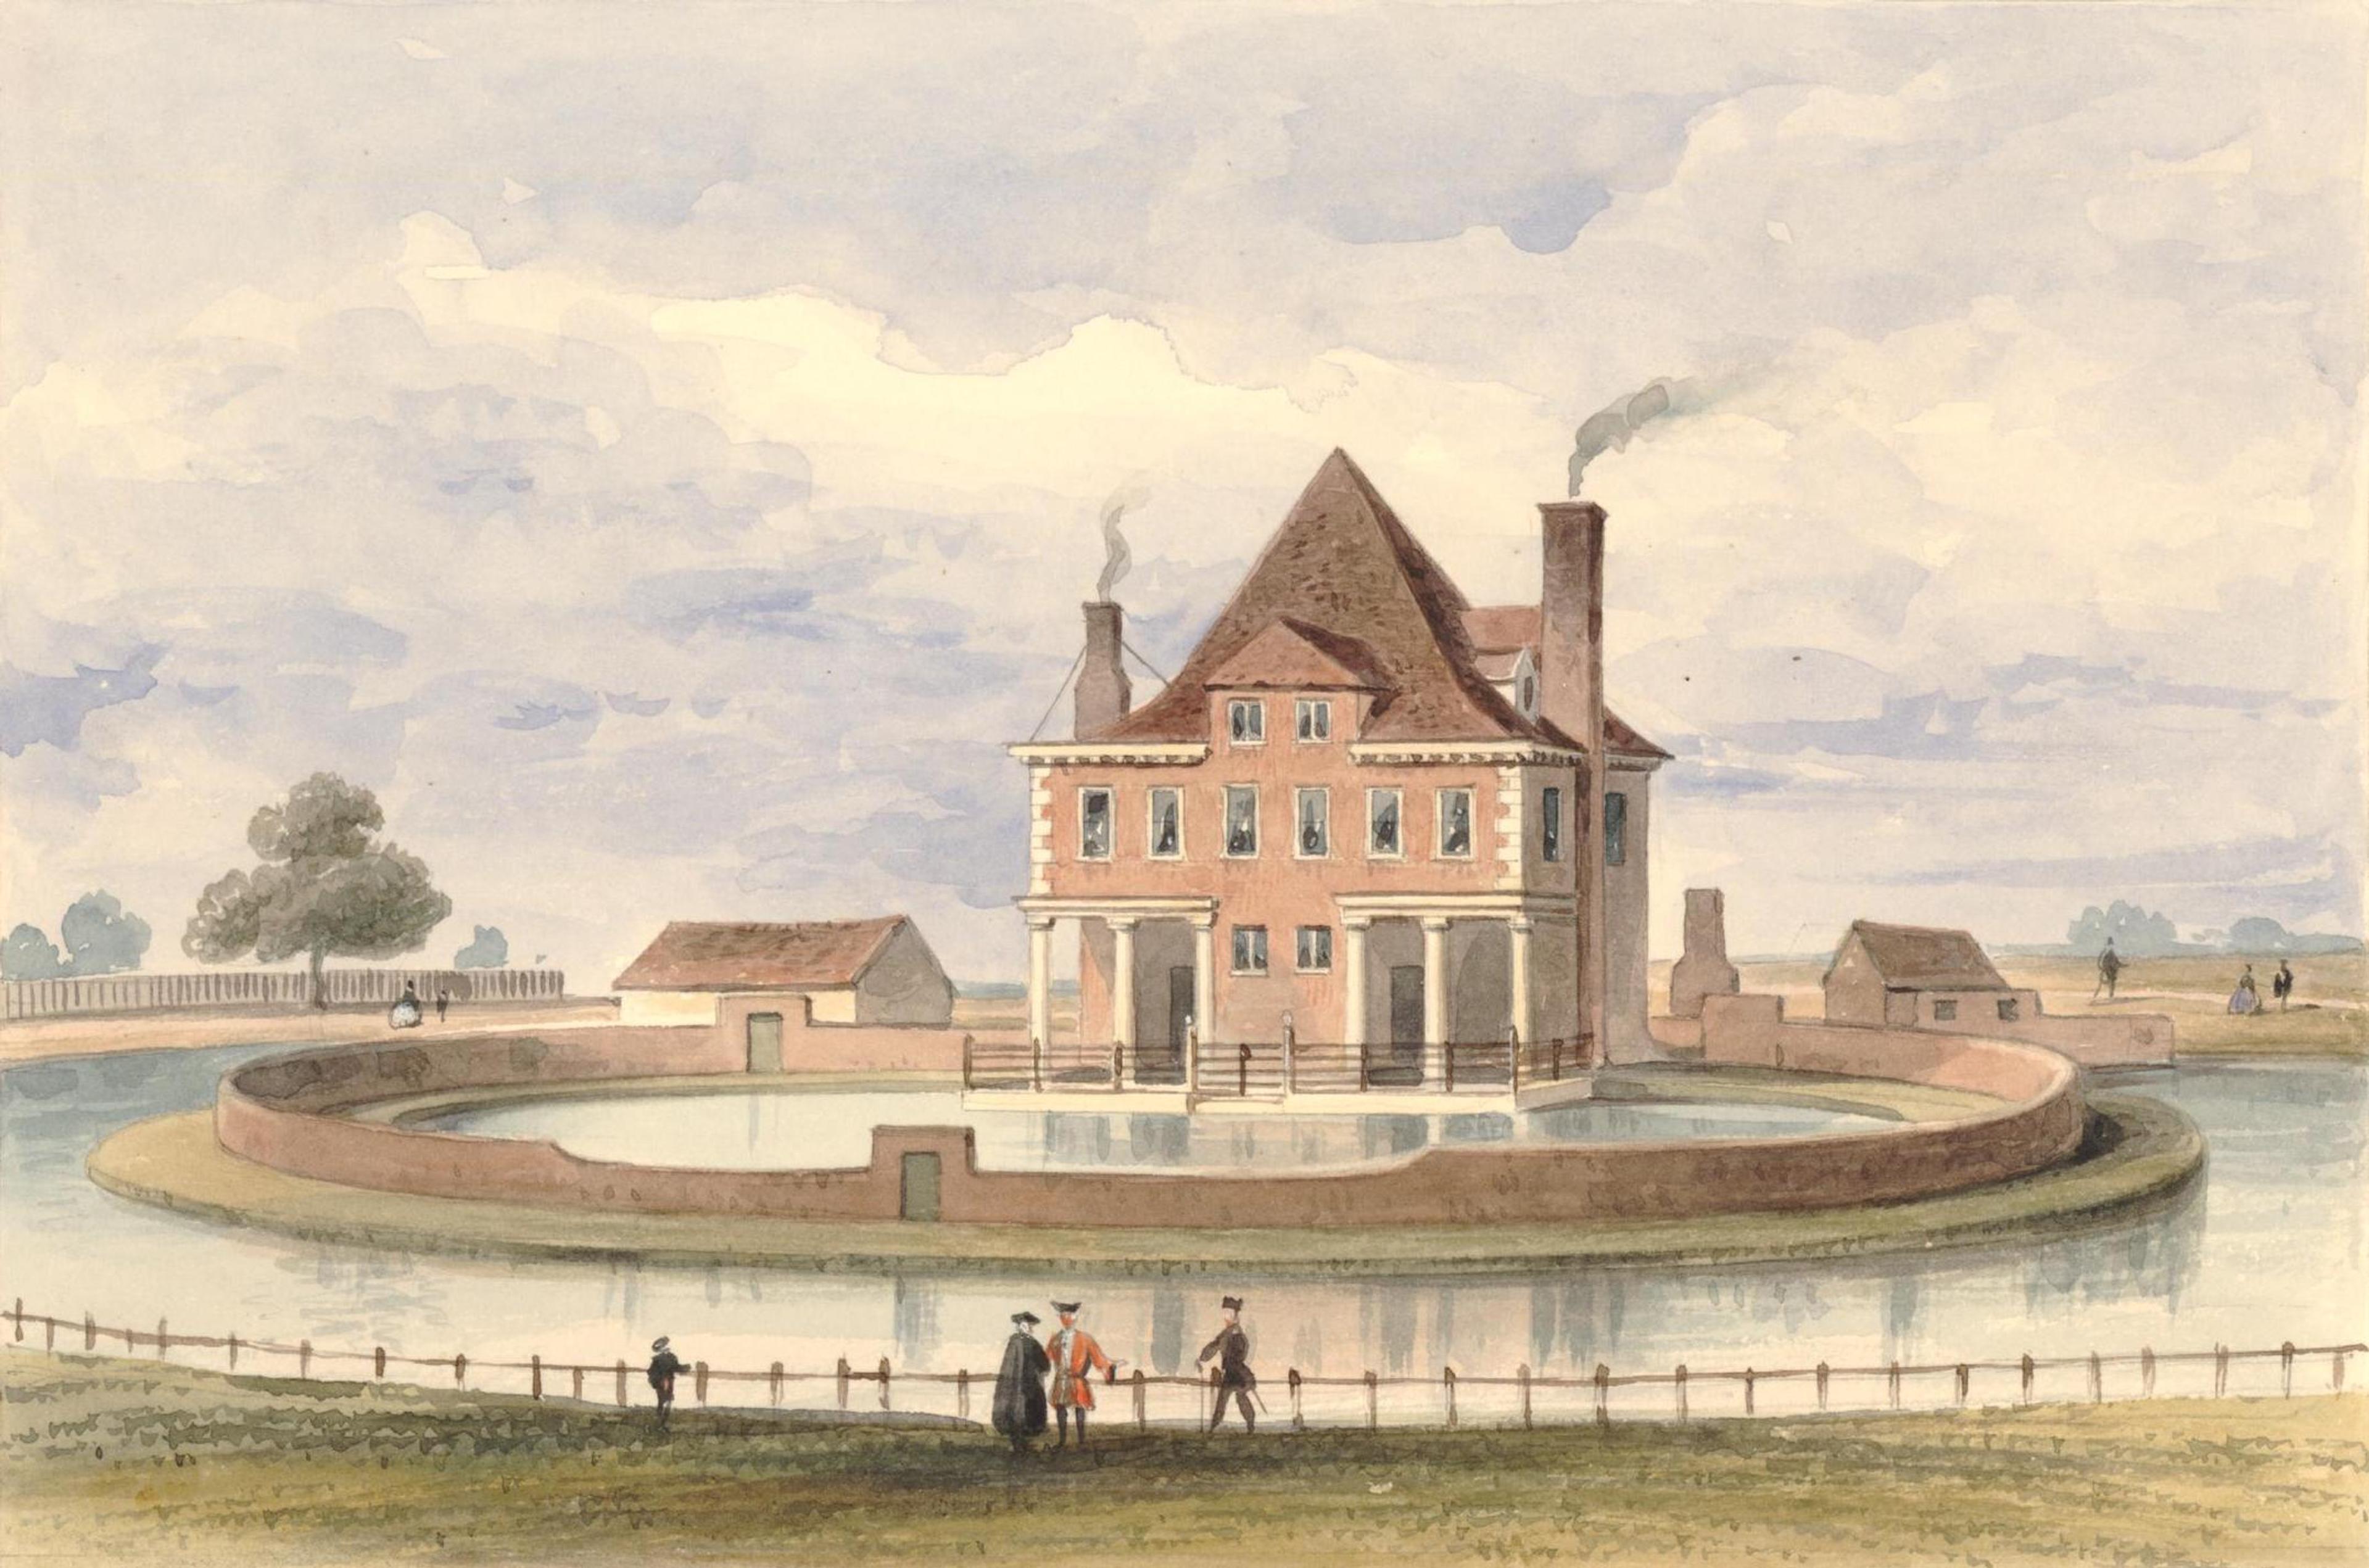 Painting of a pink house on the banks of a large pond with people in 17th century clothes in the foreground